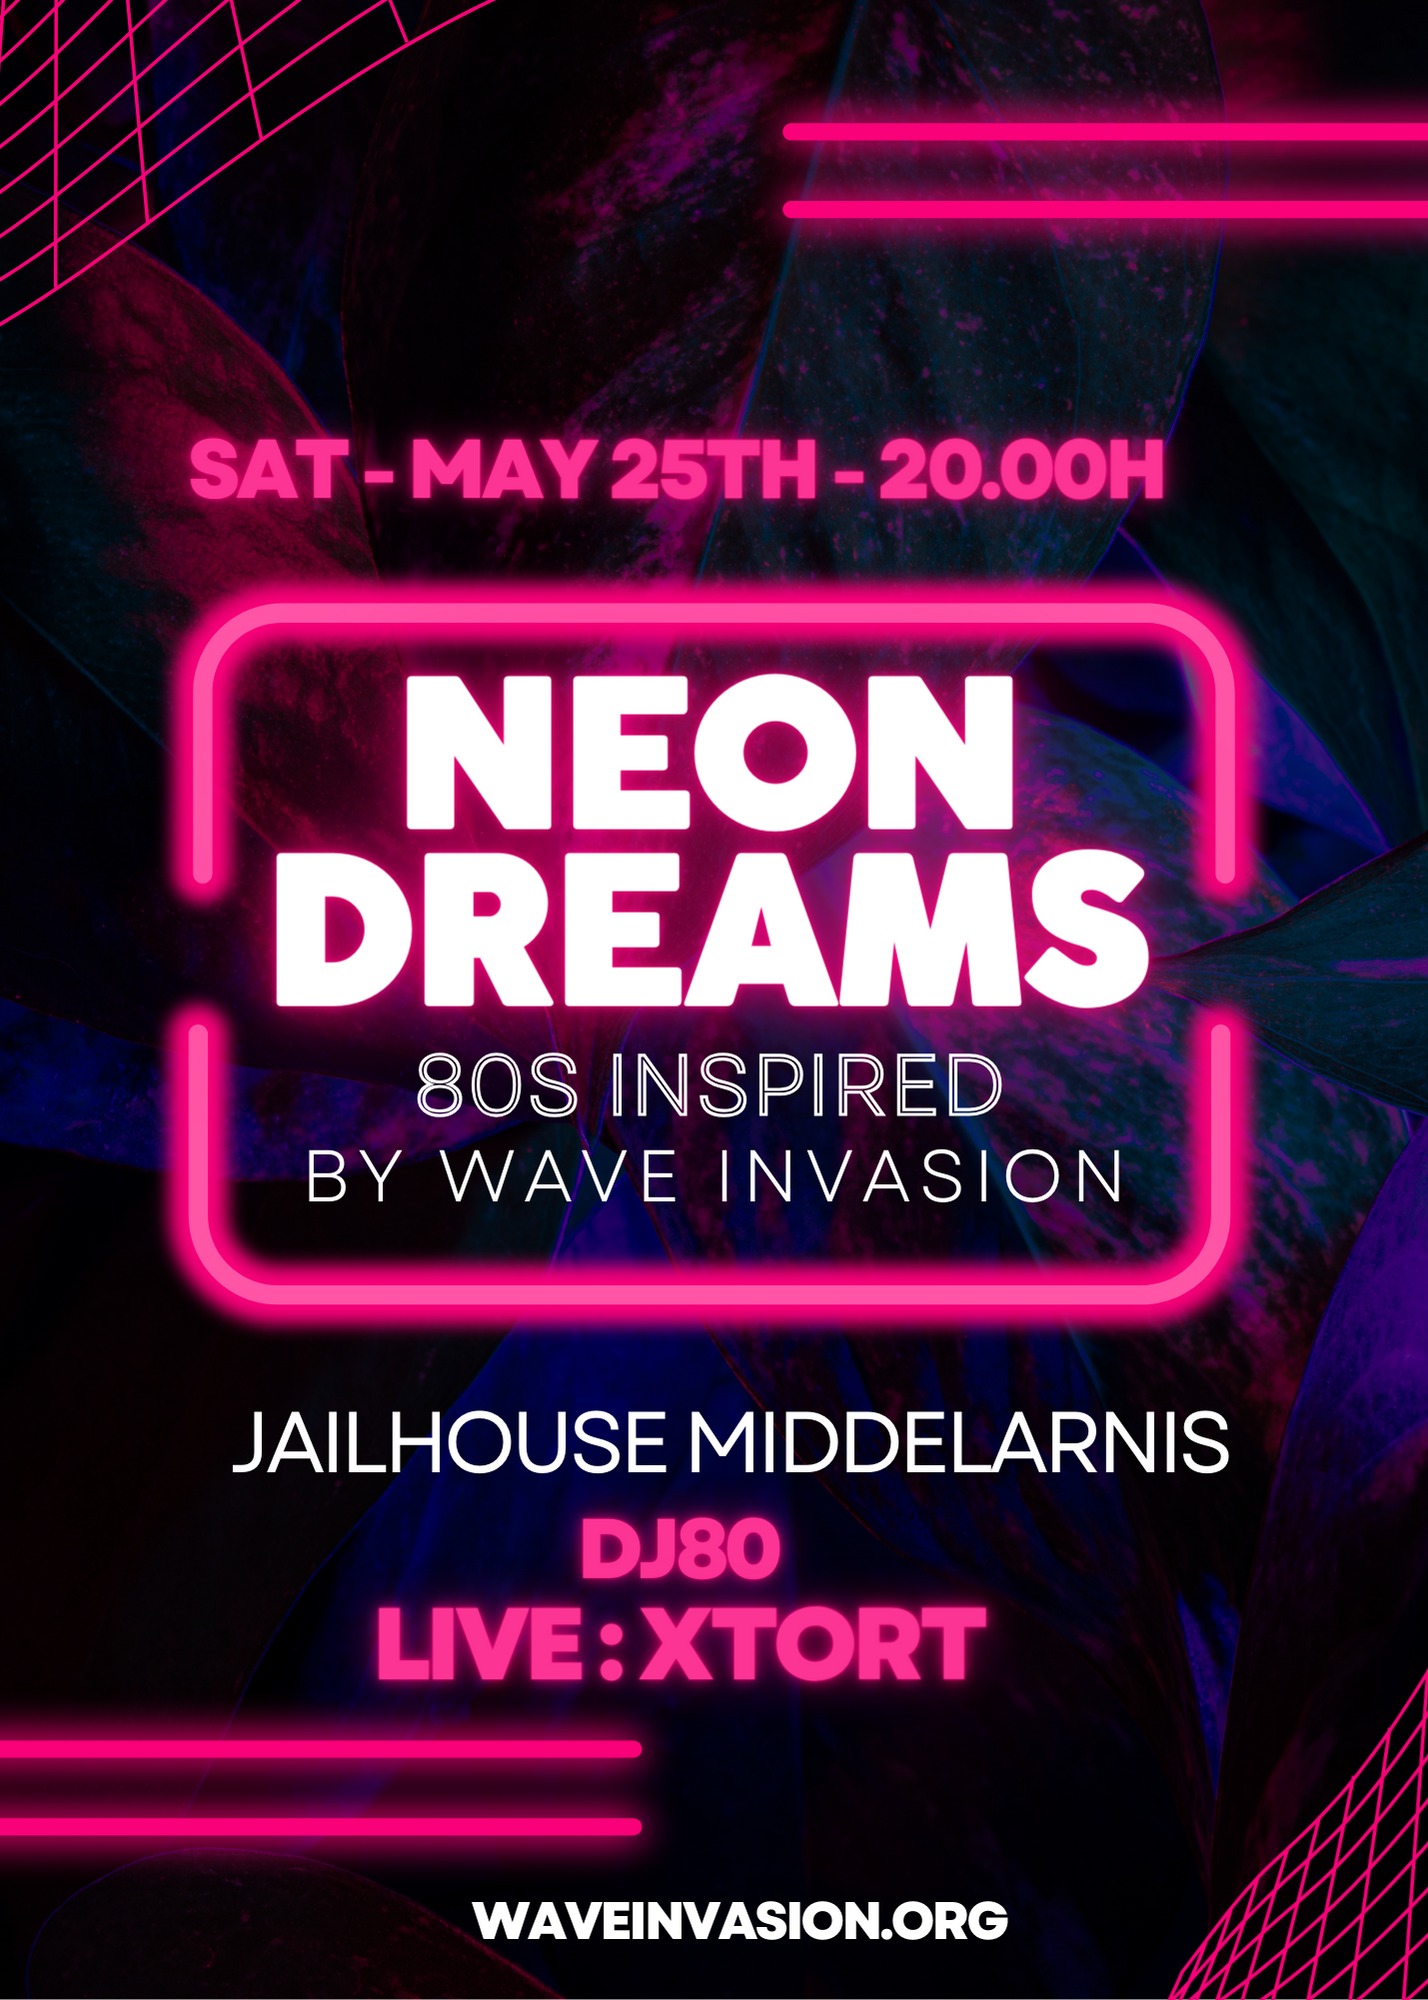 Neon Dreams by Wave Invasion